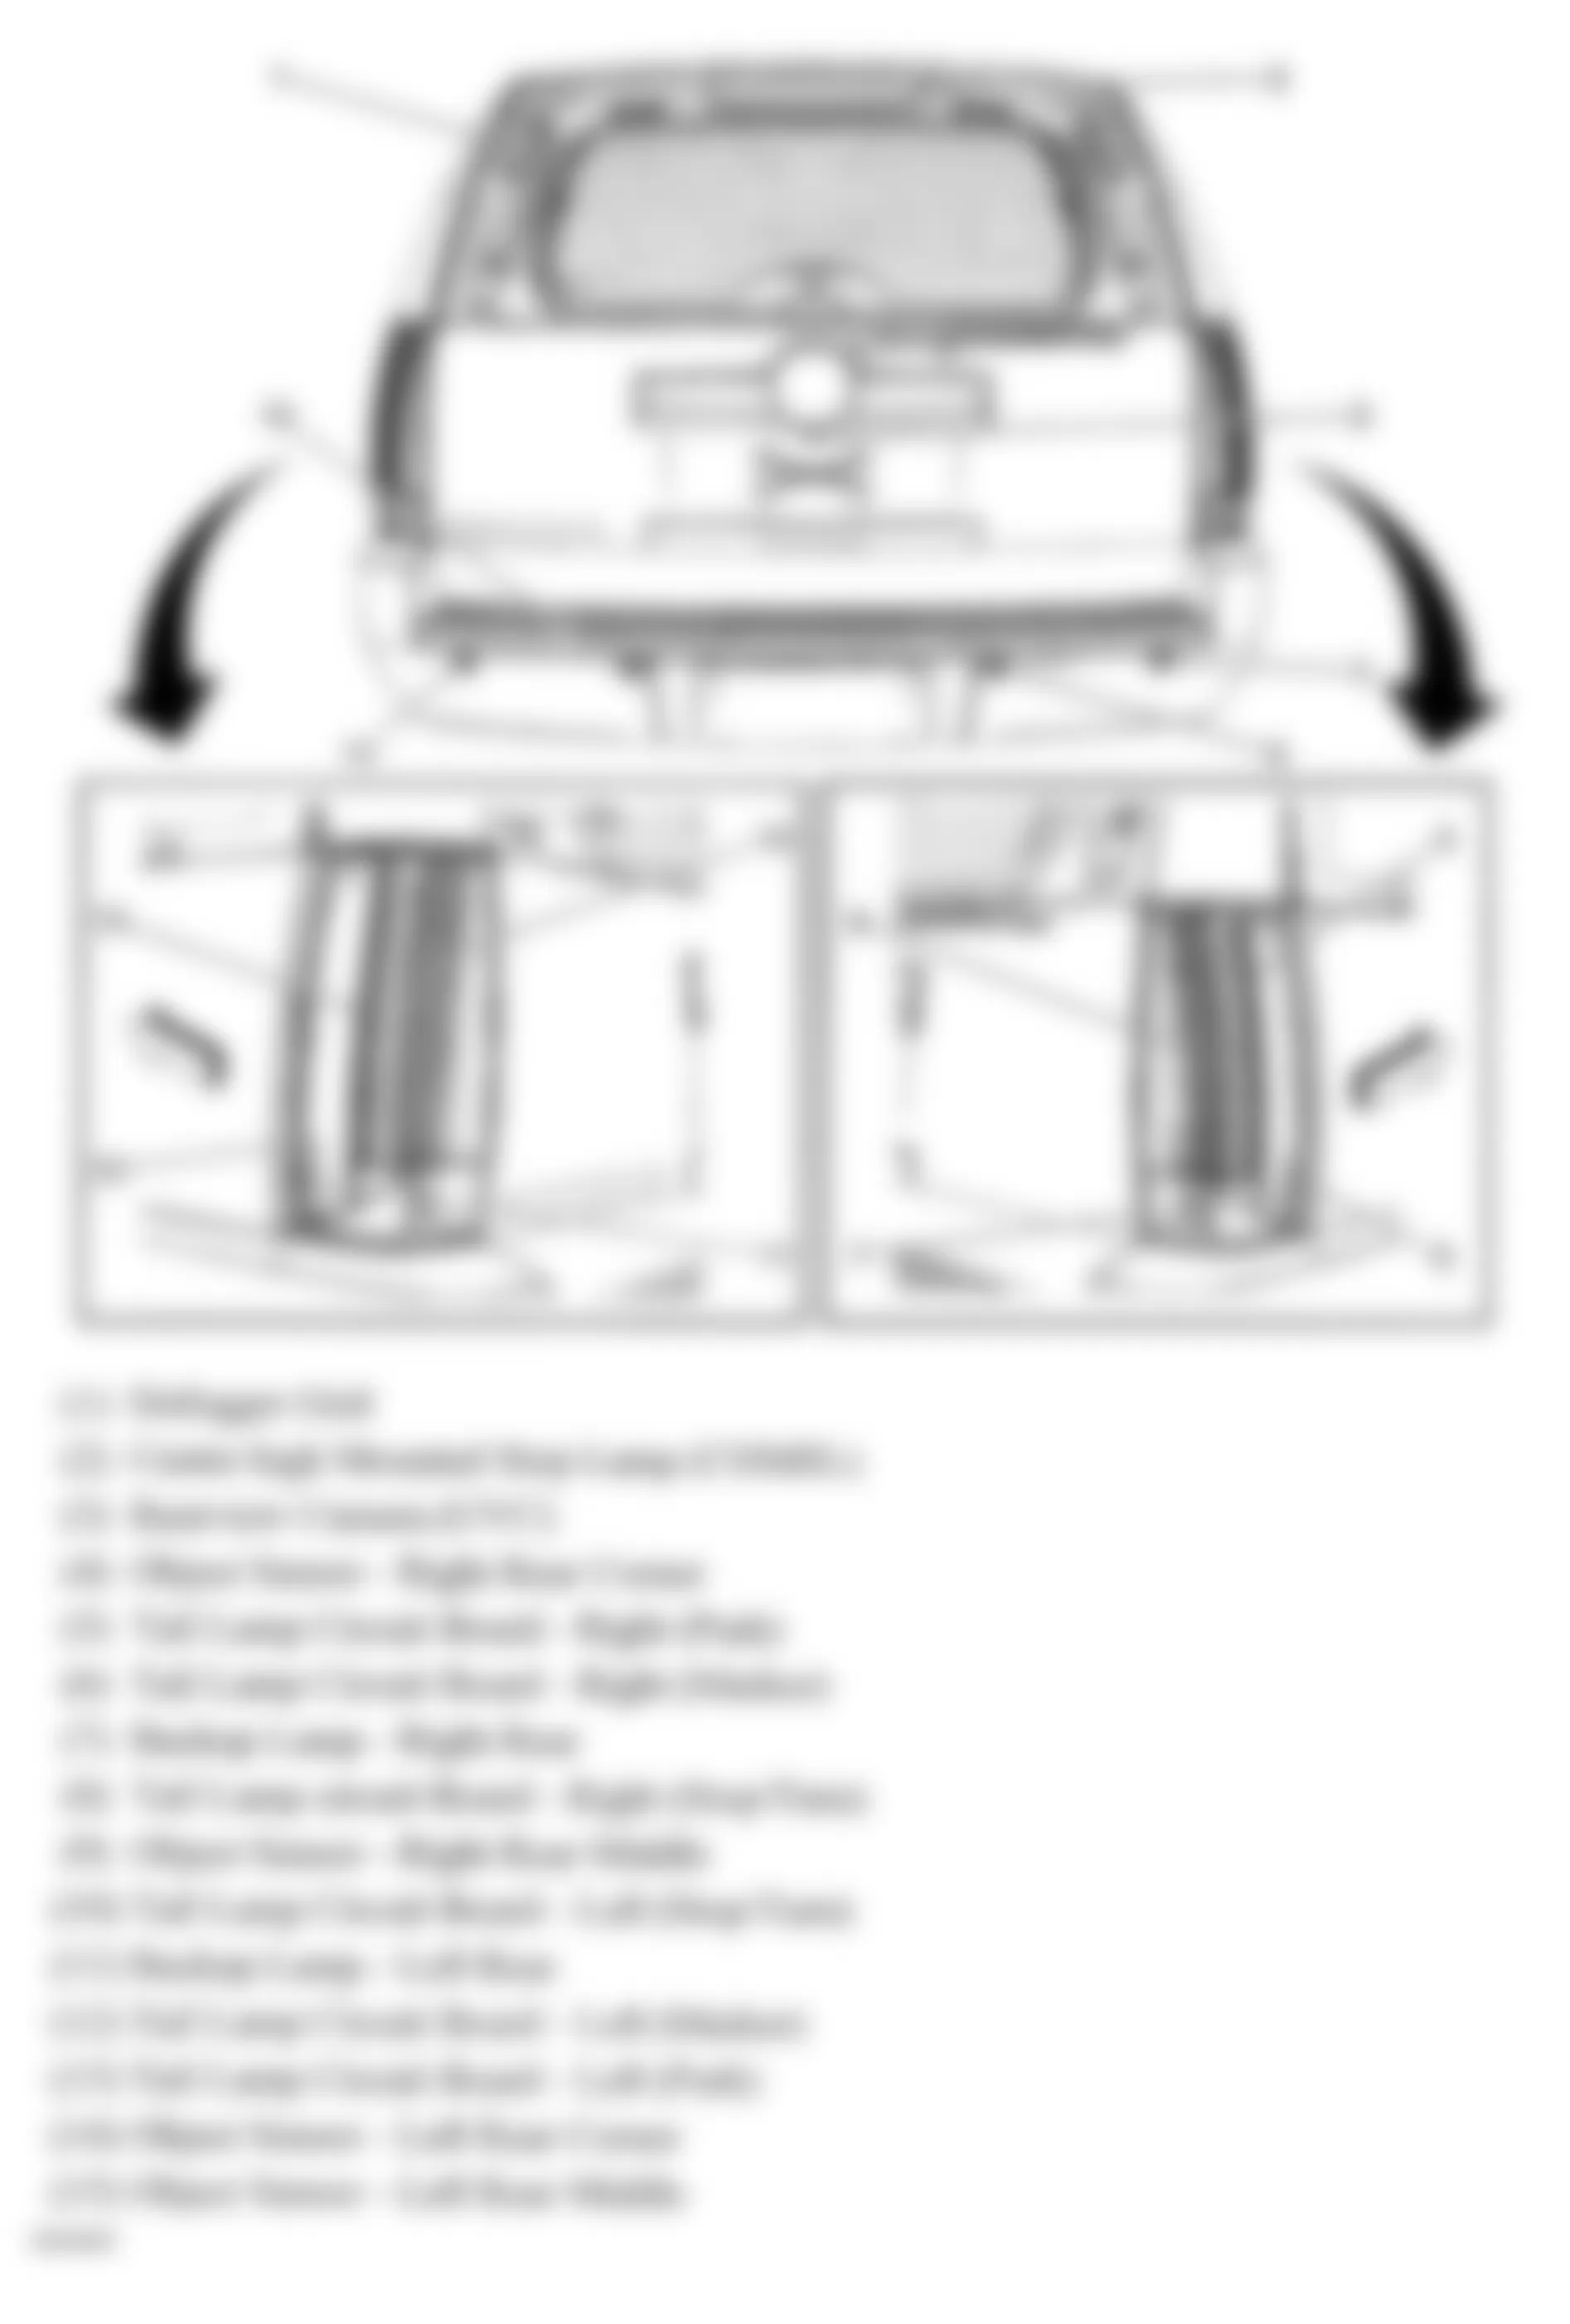 Chevrolet Suburban K2500 2010 - Component Locations -  Rear Of Vehicle (Tahoe & Escalade W/One Piece Liftgate)